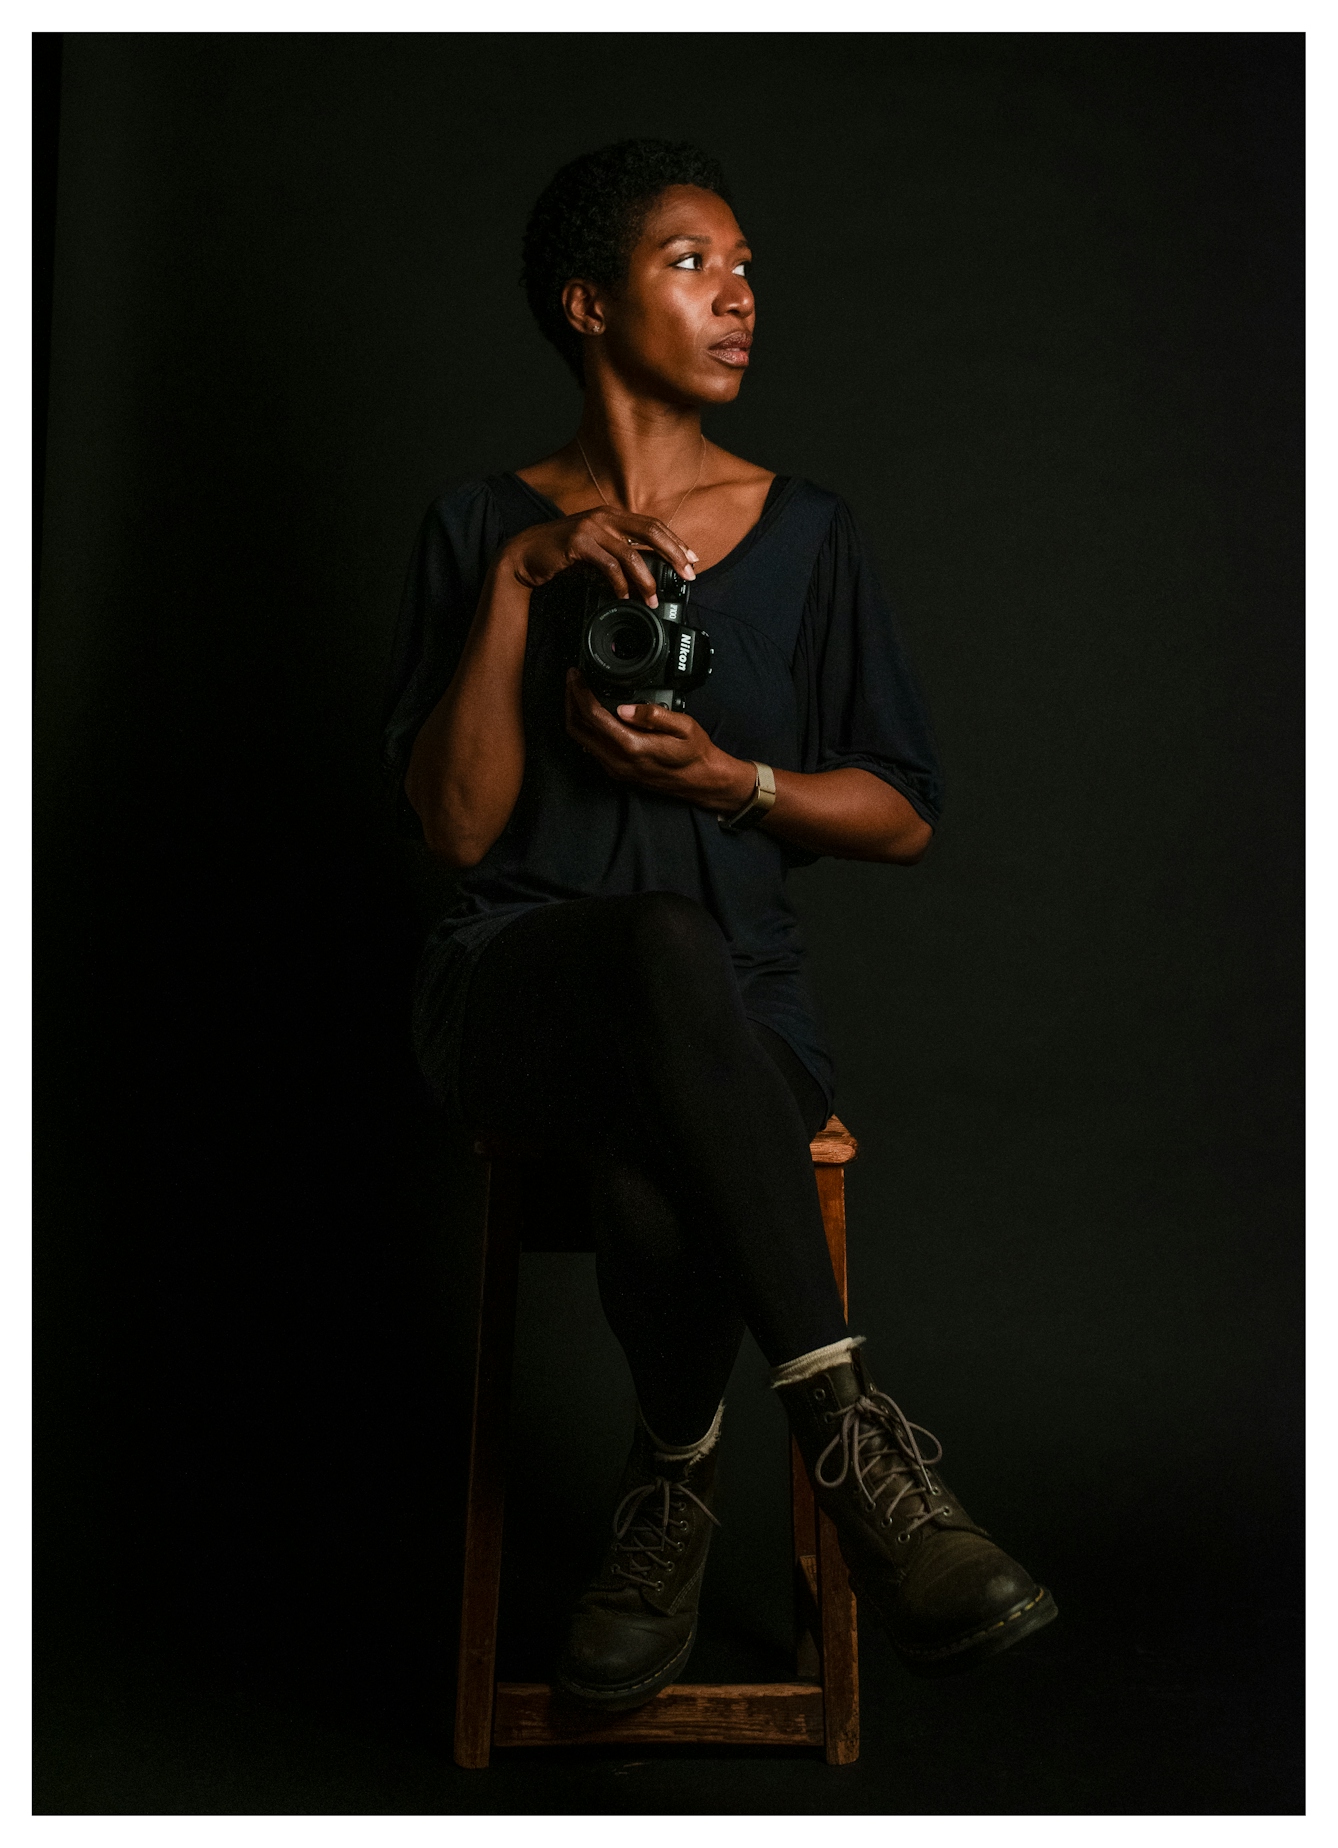 Photographic portrait of a Black woman holding a camera, sitting on a wooden stood against a black background. She is looking away to her left with the air of quite confidence.